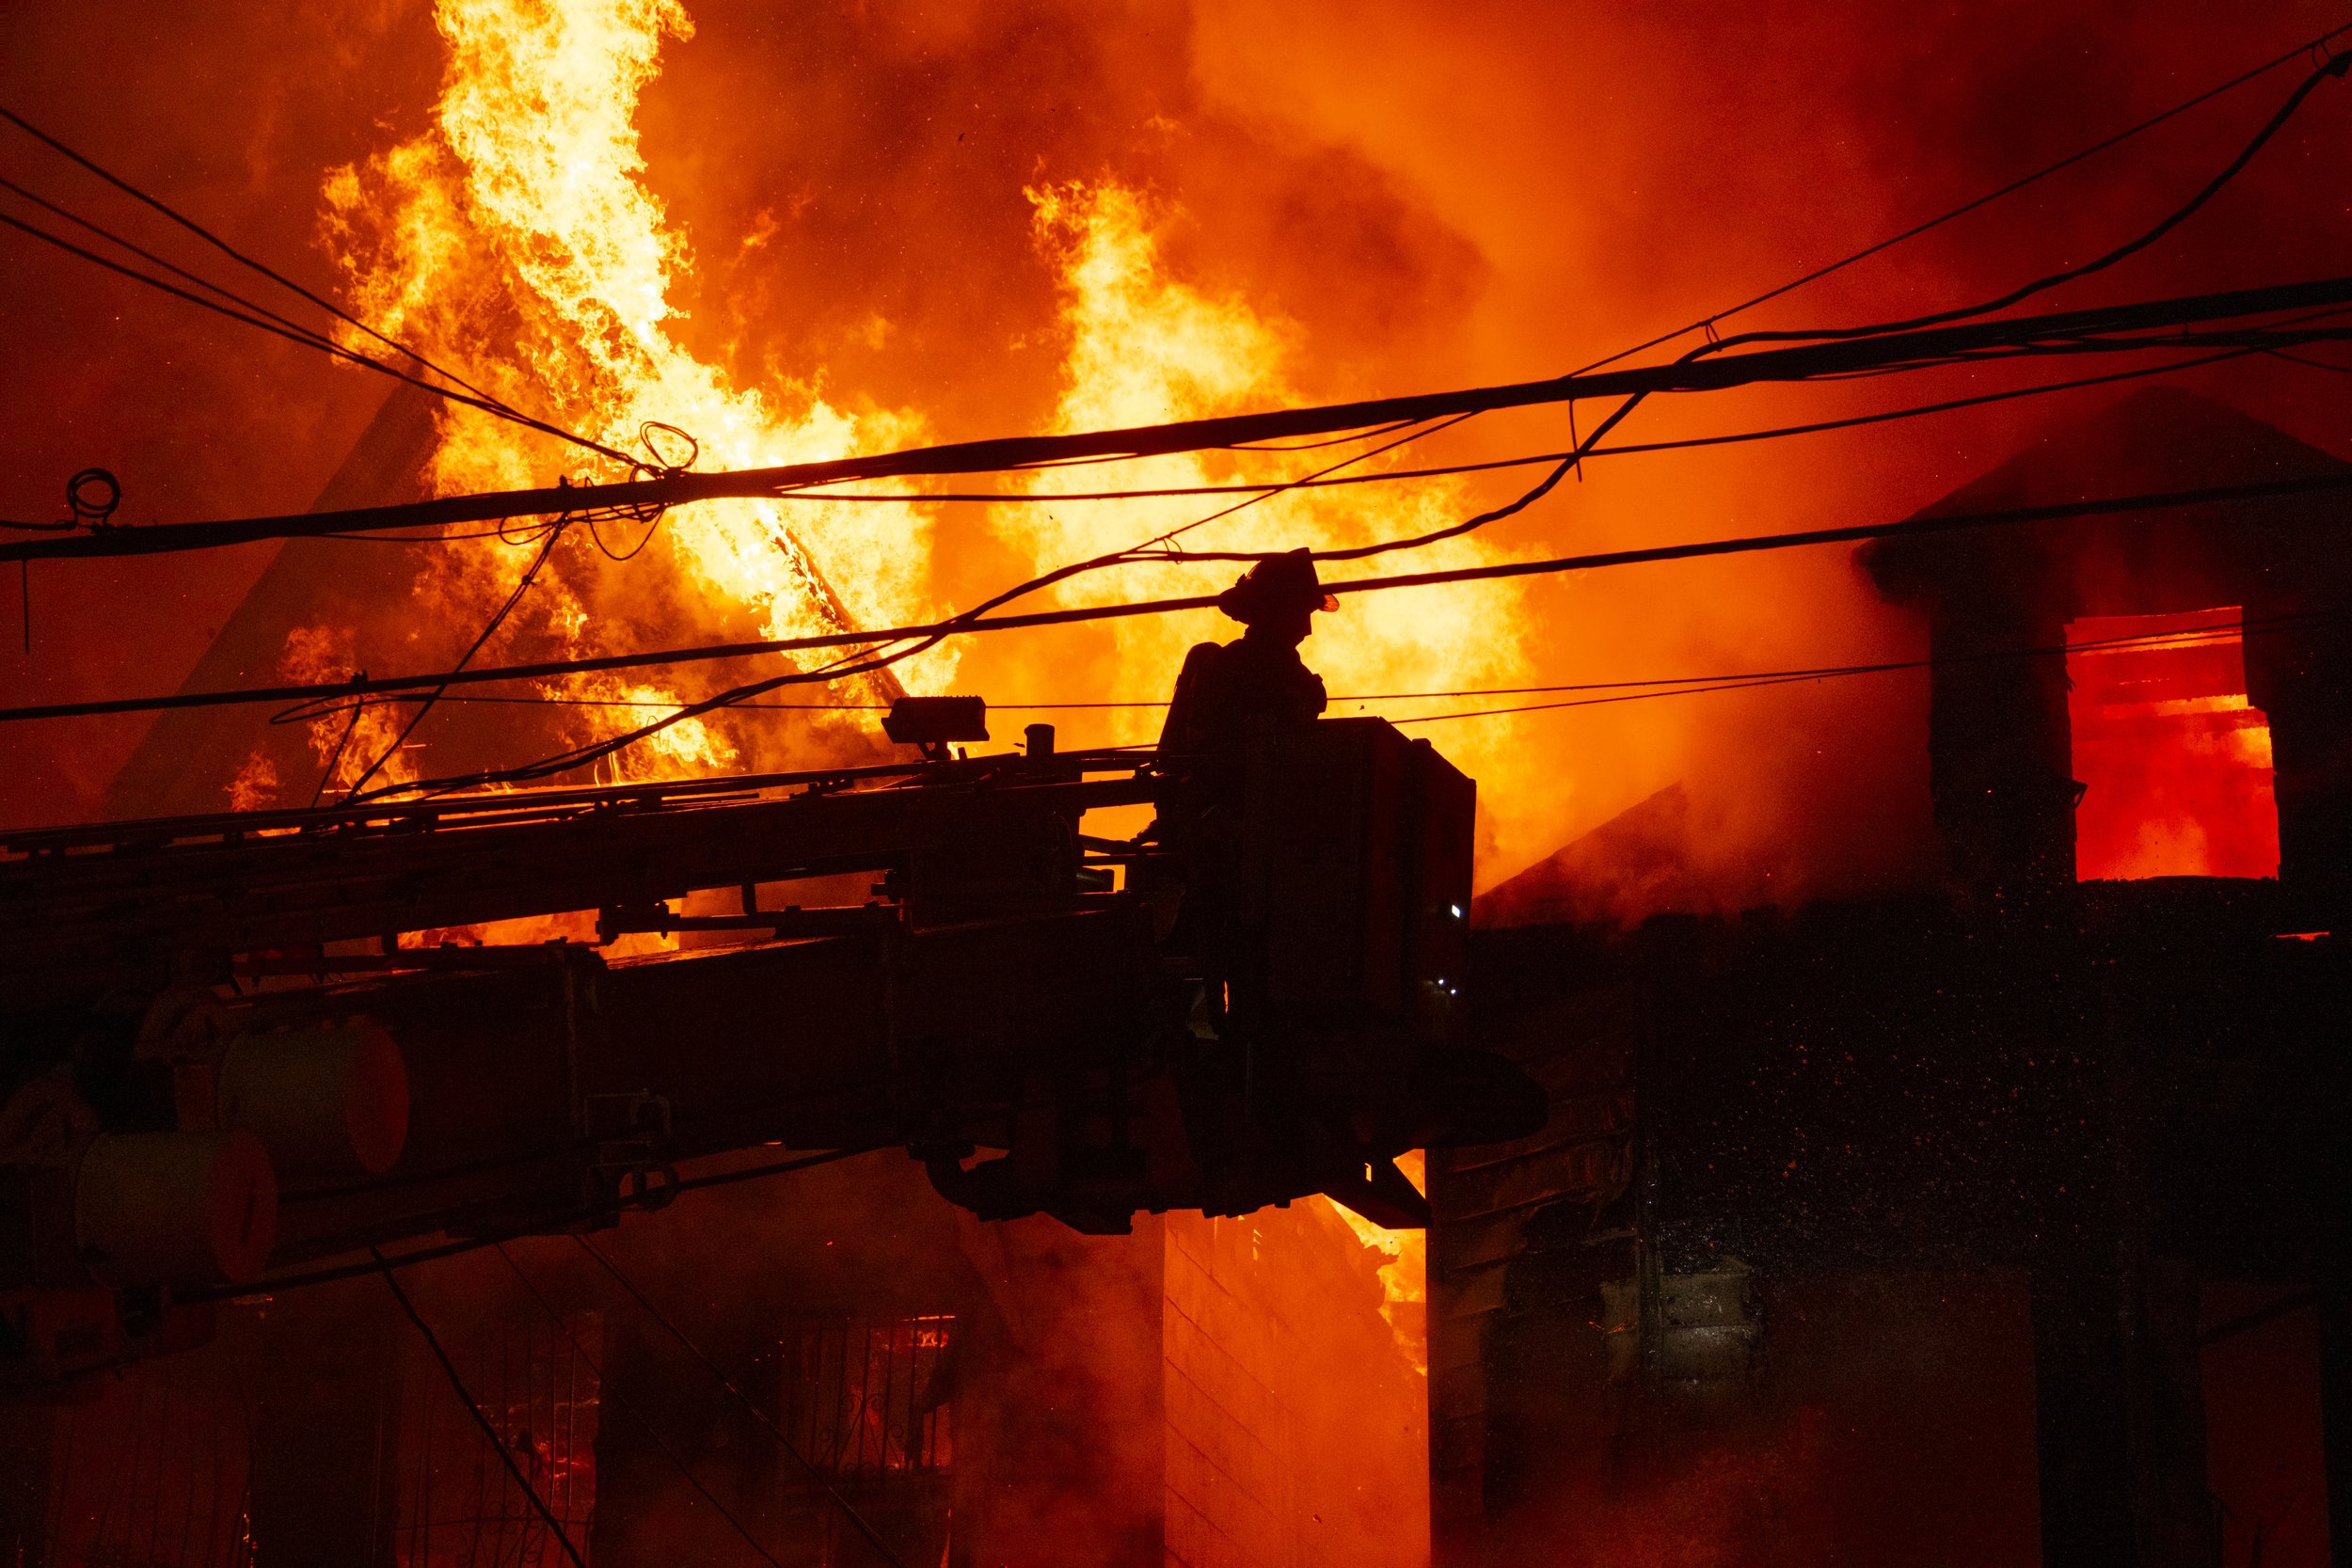  March 22nd, 2023 - Bronx, NY: At approximately 1:10 a.m., firefighters responded to 1043 Ogden Ave. for two vacant houses fully engulfed in flames upon arrival leading to a 4th Alarm response from the FDNY before the massive flames that could be see